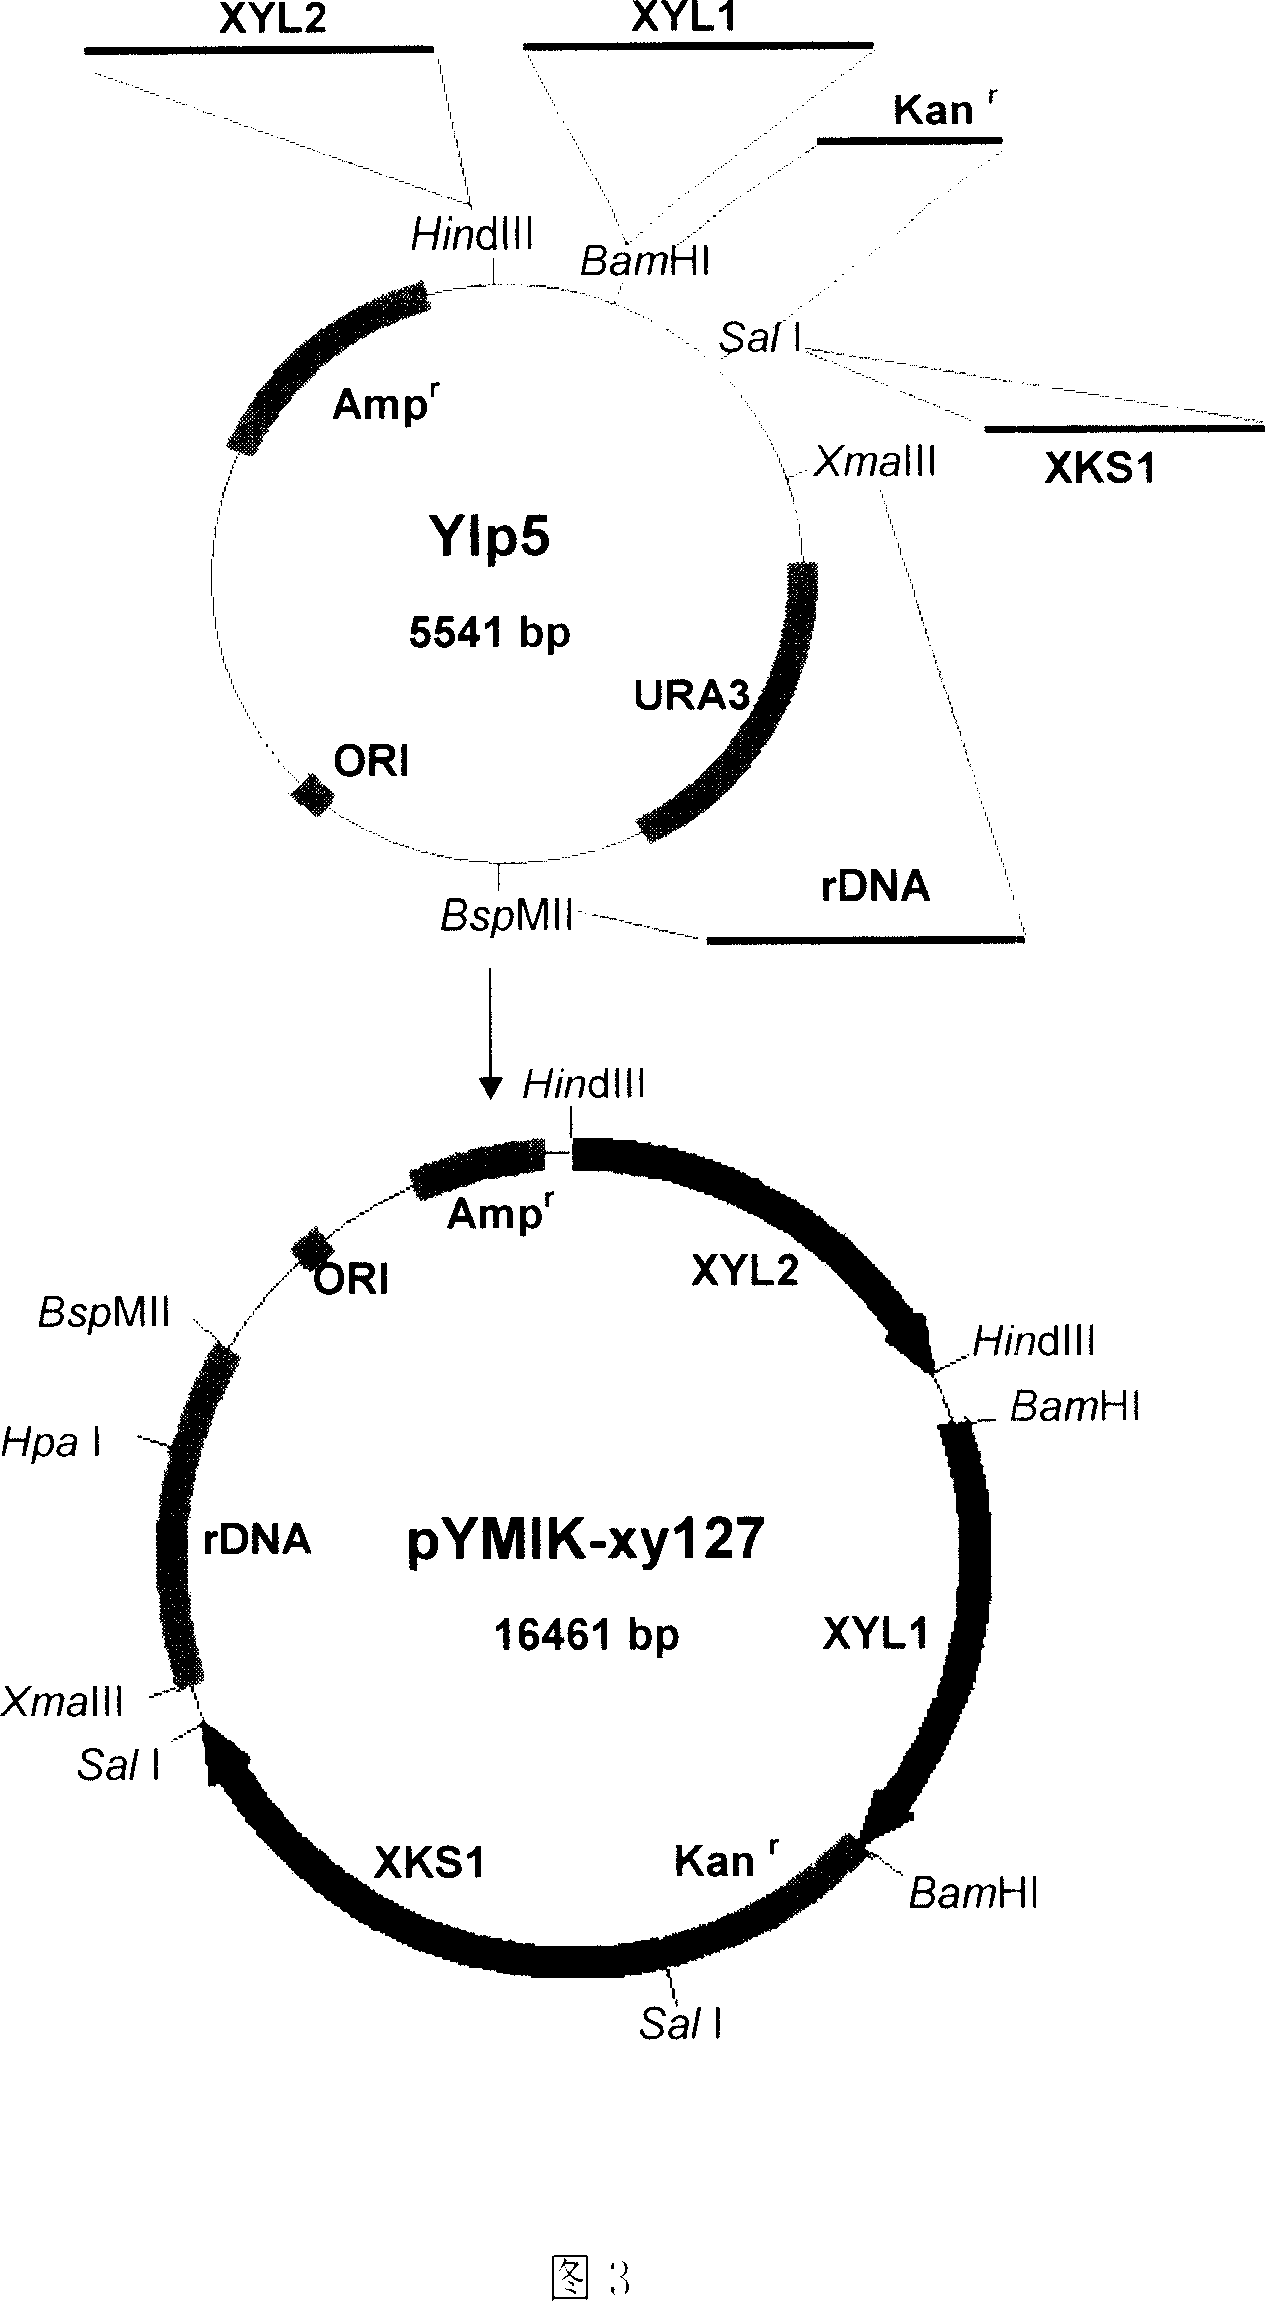 Process for producing alcohol by co-fermentation of glucose and xylose